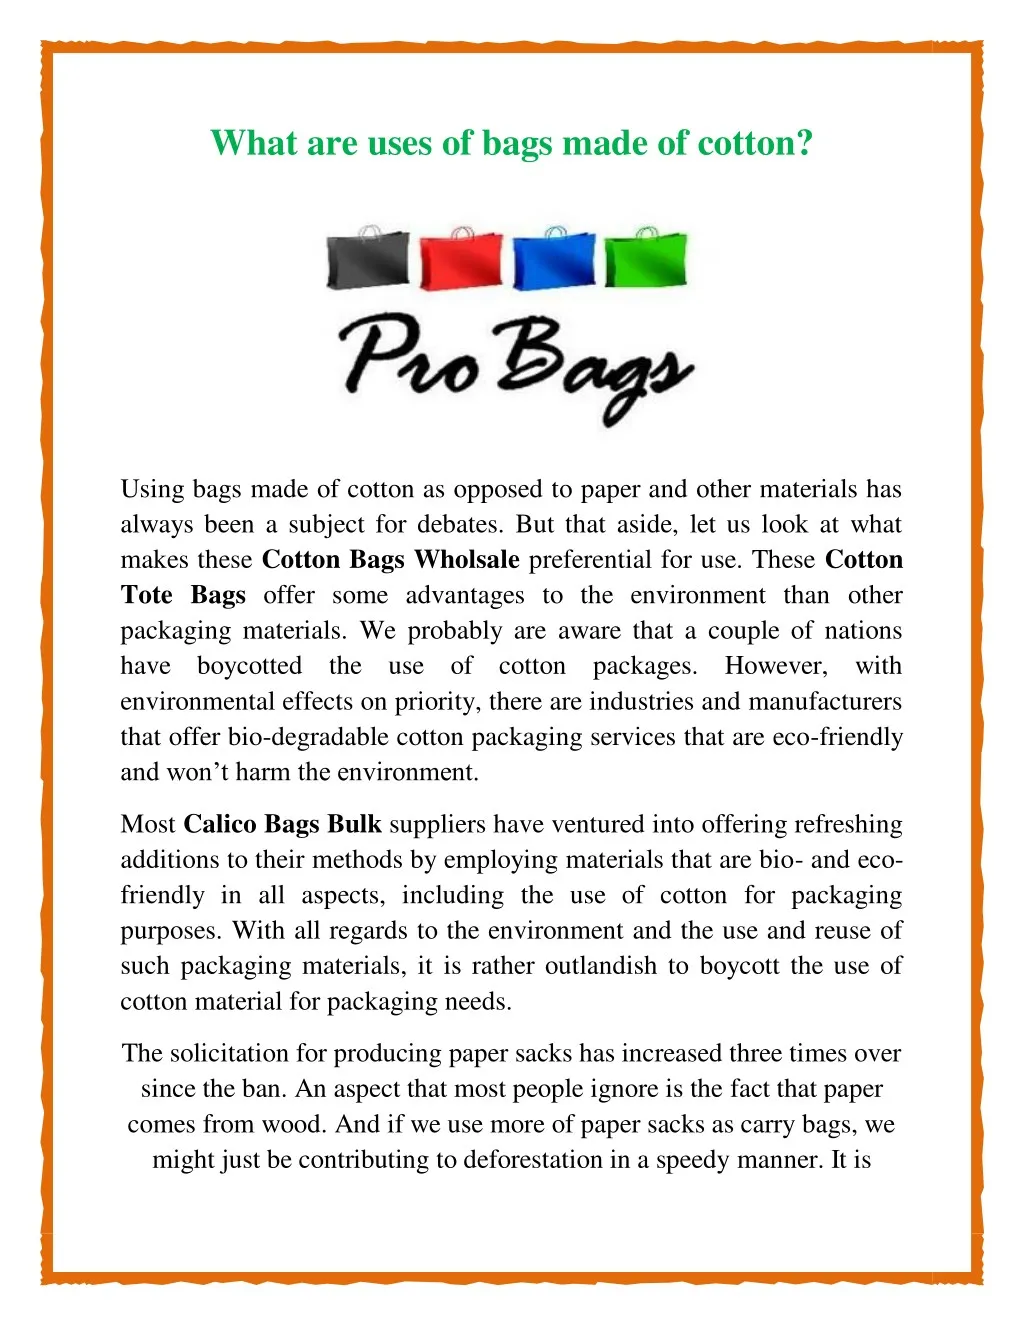 what are uses of bags made of cotton